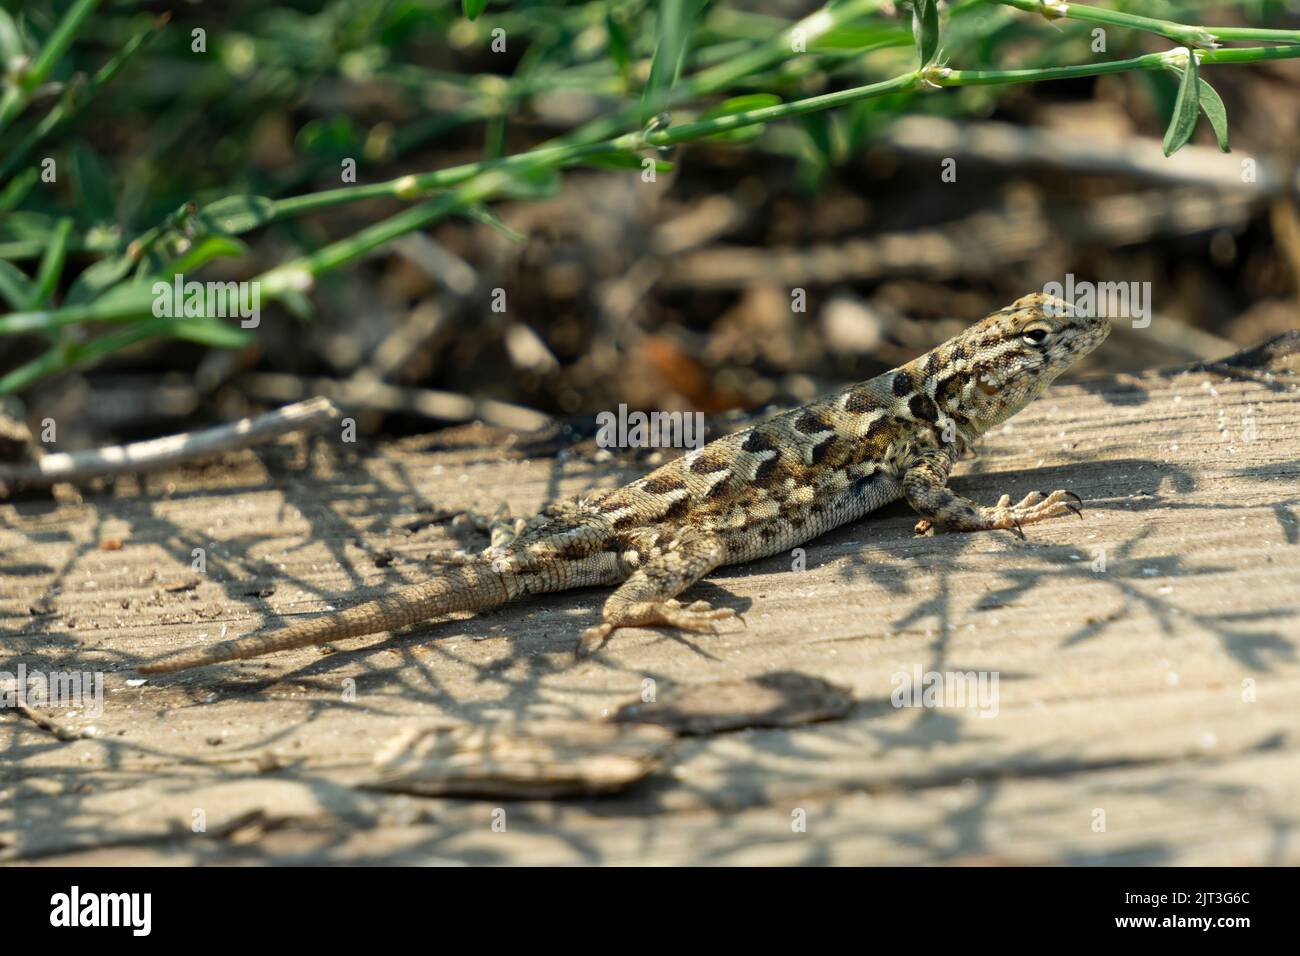 A nale western fence lizard on sunning on wooden plank. Stock Photo